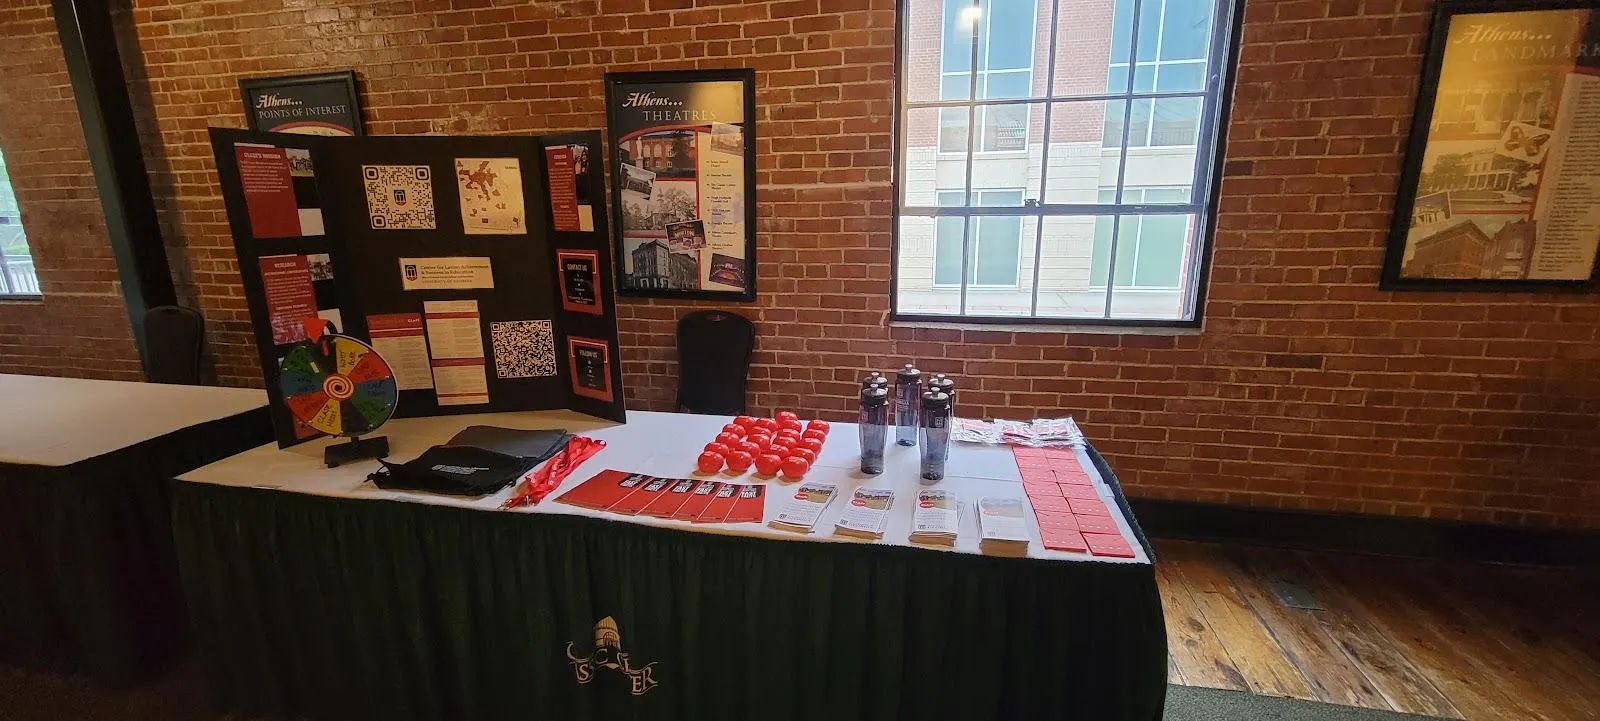 Table setup at community event